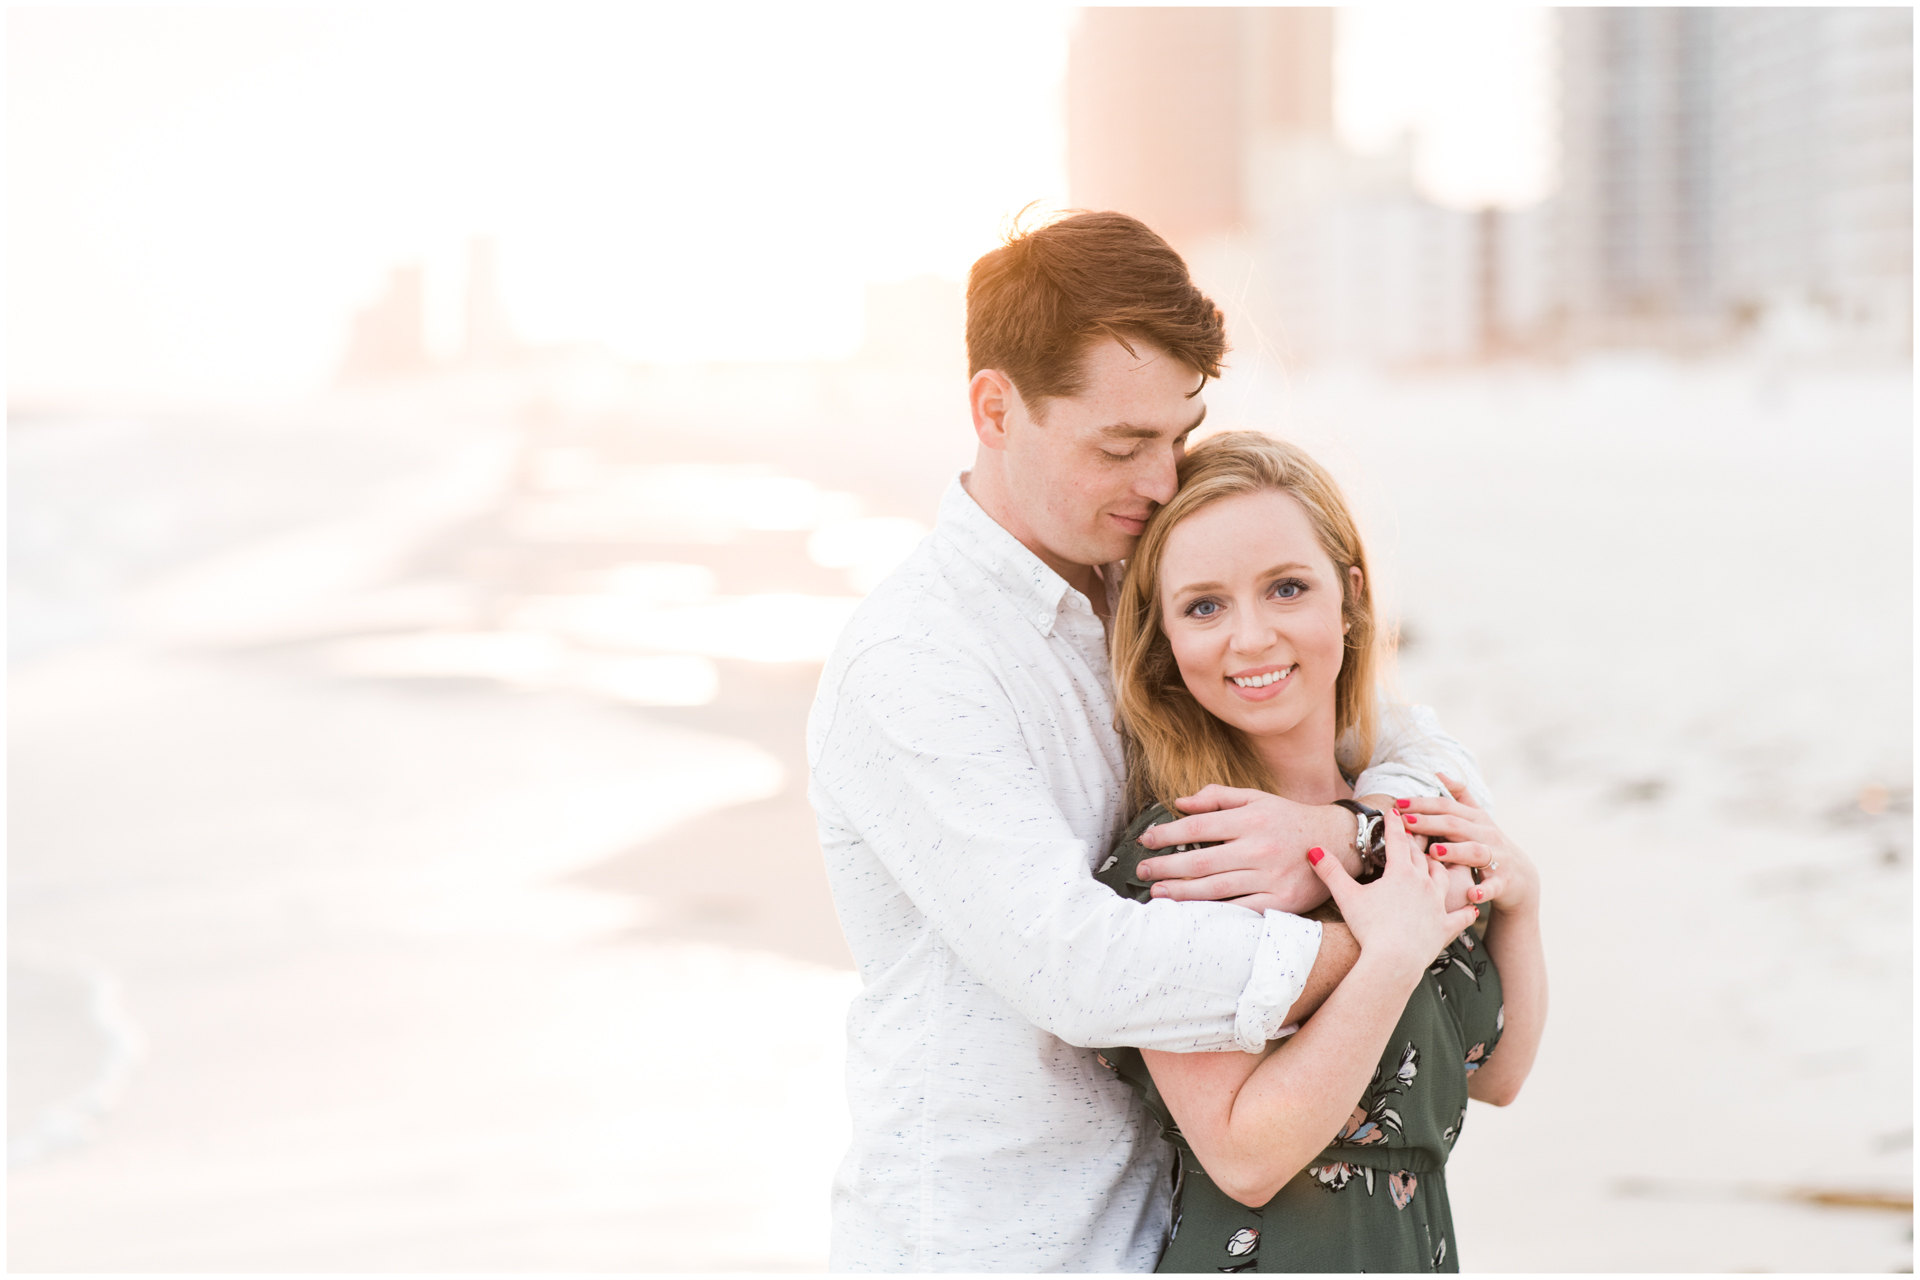 Cotton Candy sky beach engagement session - Gulf Shores Engagement Session